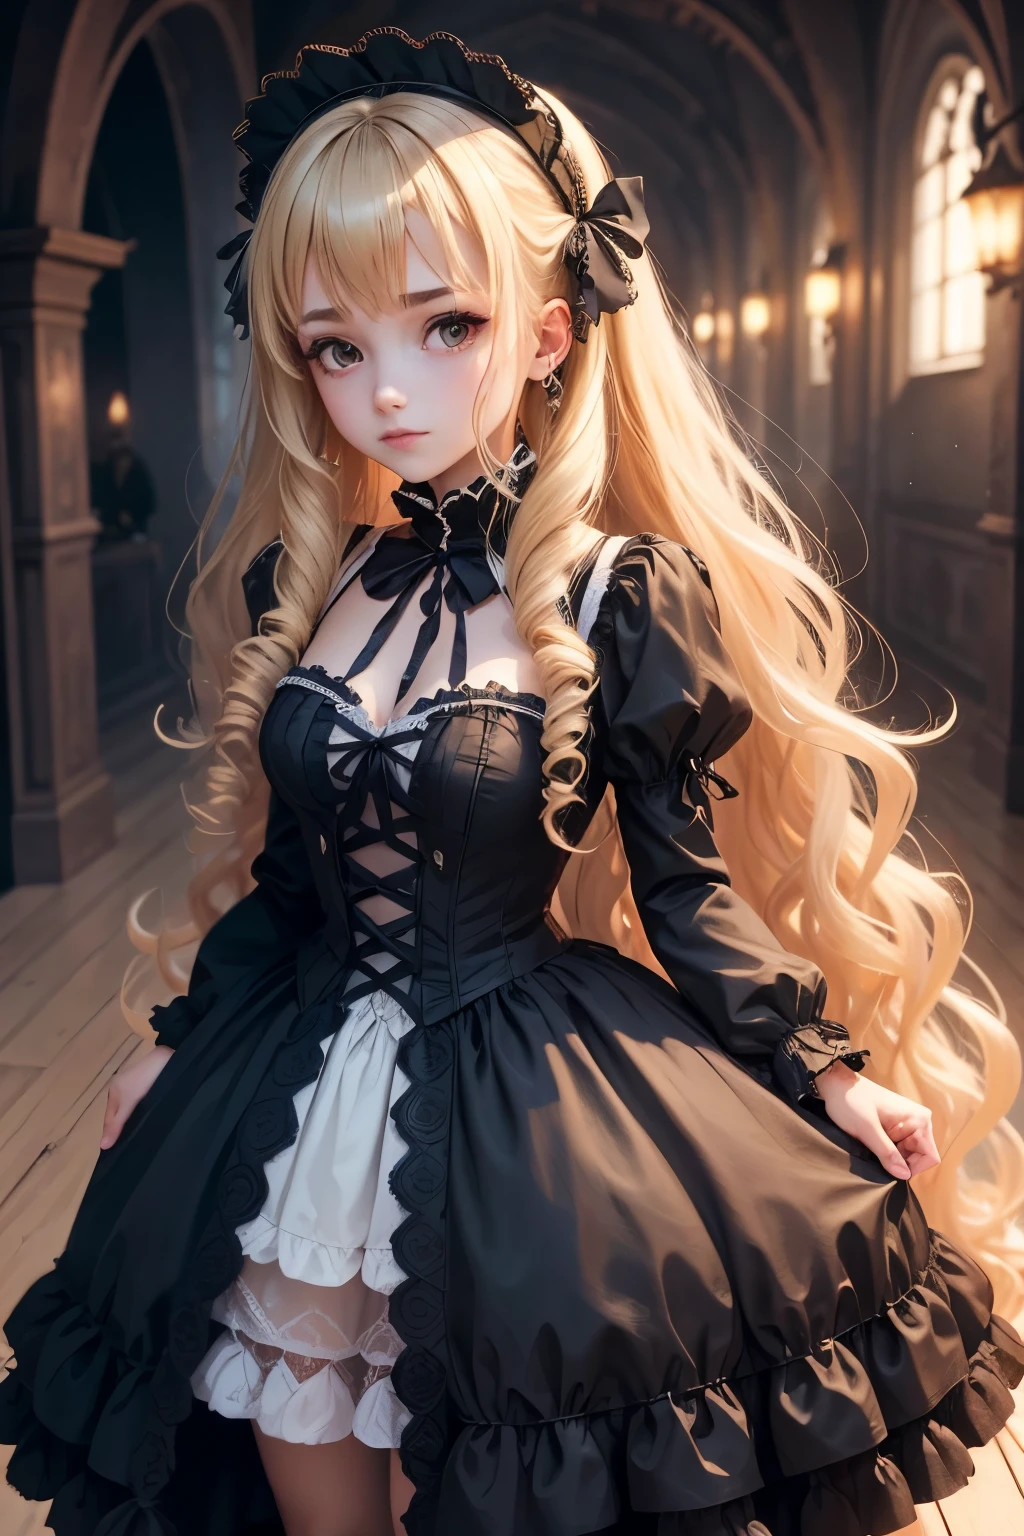 Nothing, Highest Quality, girl, blonde, curly hair, evil girl, dress,Gothic Lolita, long hair, Dress with skirt, 8k, Dark atmosphere, Gothic castle study, with brake ears, masle ve vlasech, in beach, swin s
uit